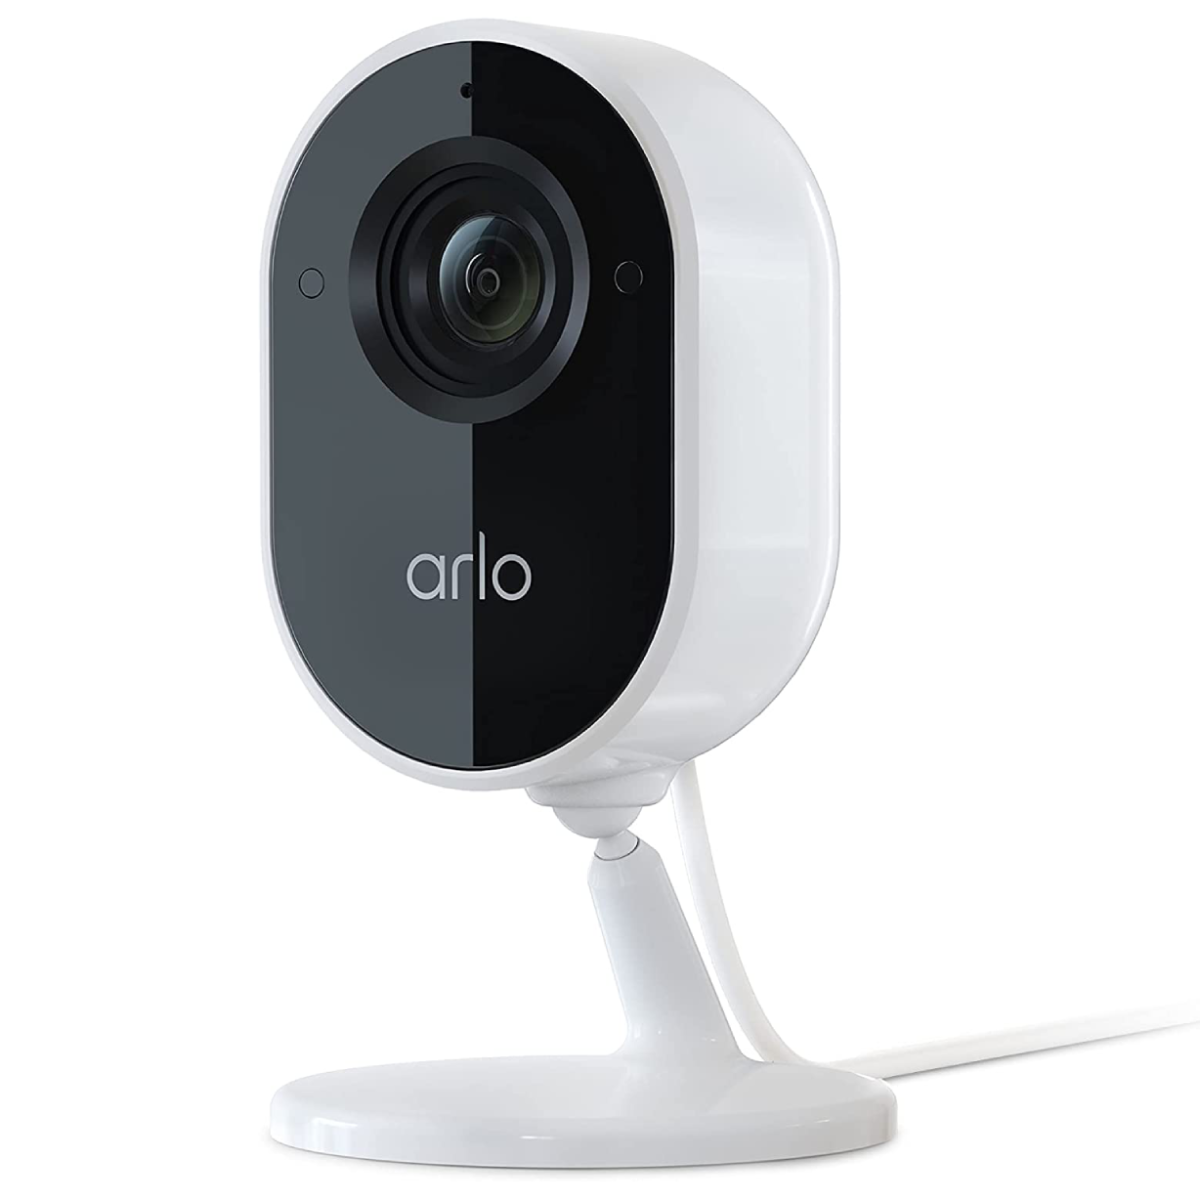 The Arlo Essential Indoor Camera against a white background